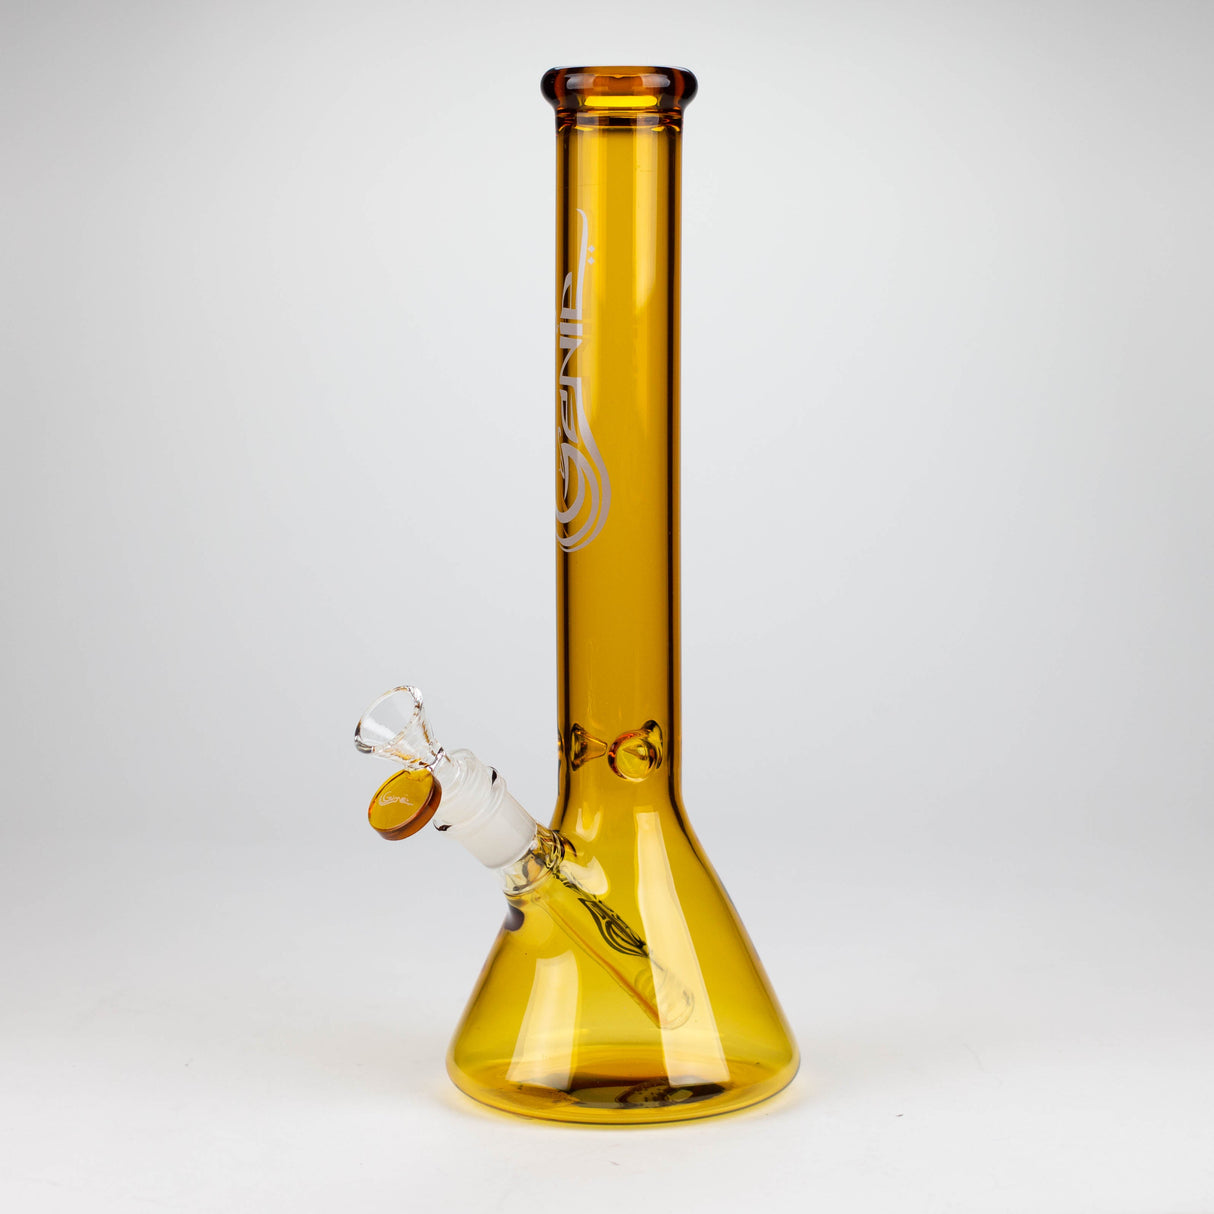 Genie | 12" color tube glass water bong [GB2130]